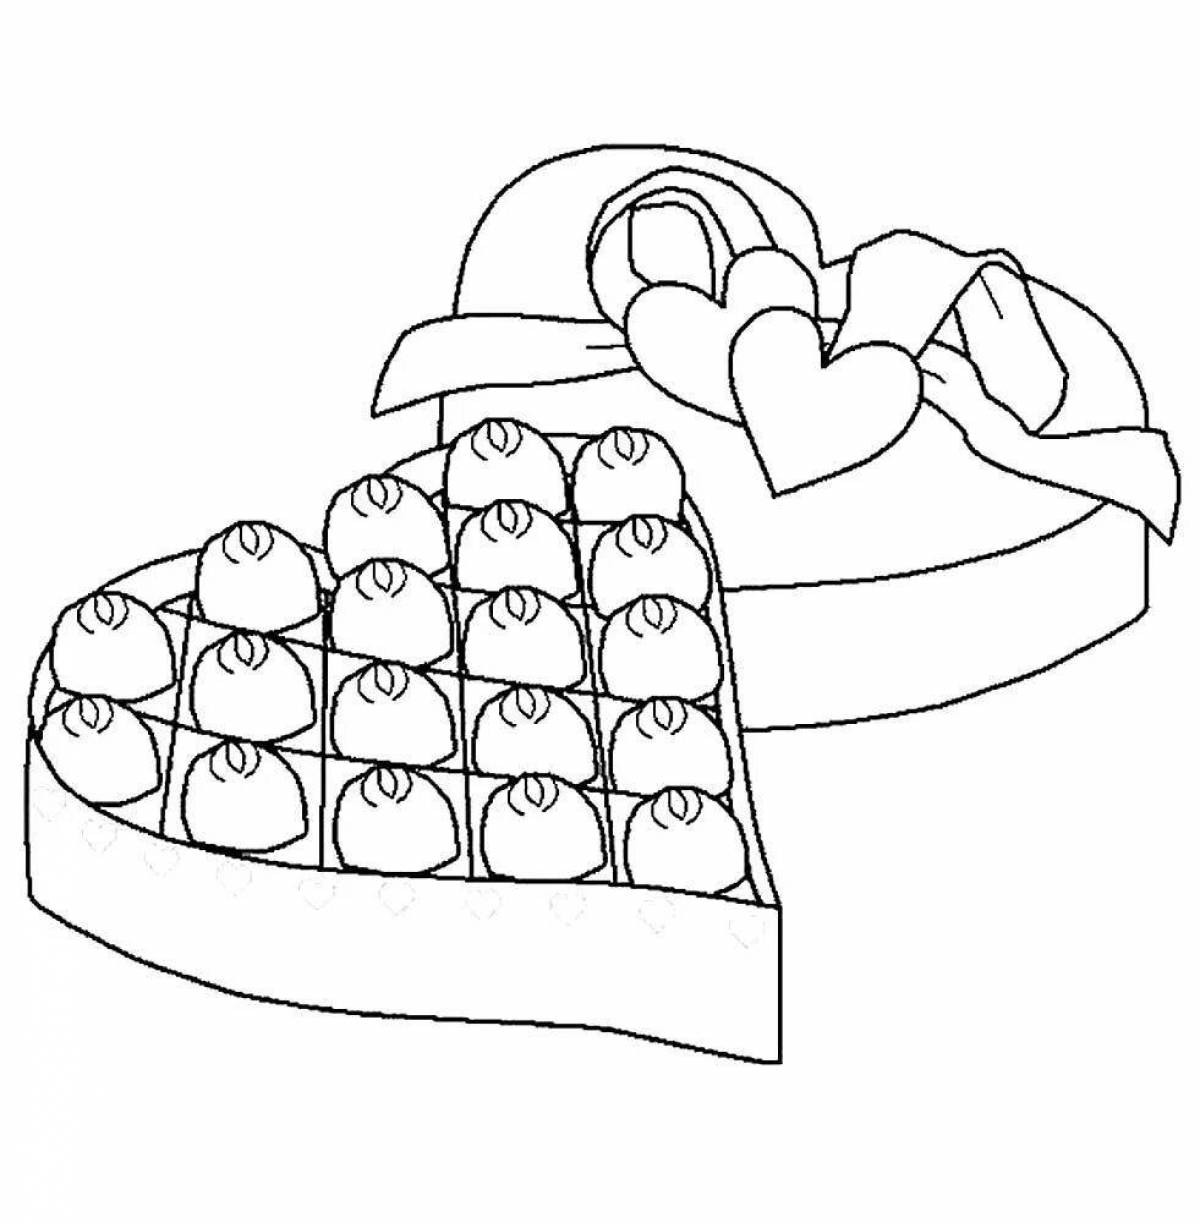 Marmalade live coloring page